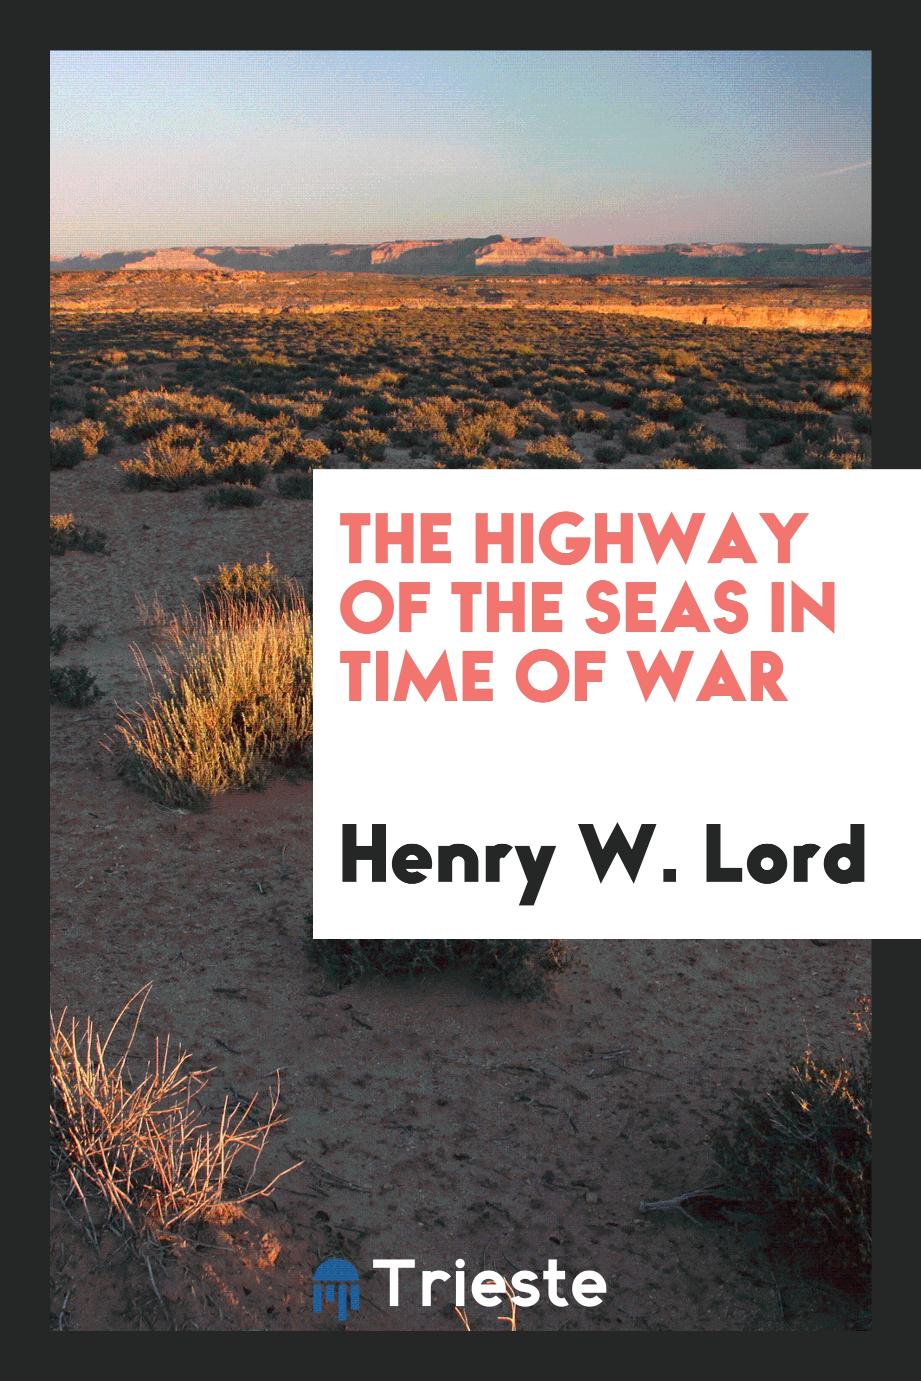 The Highway of the Seas in Time of War